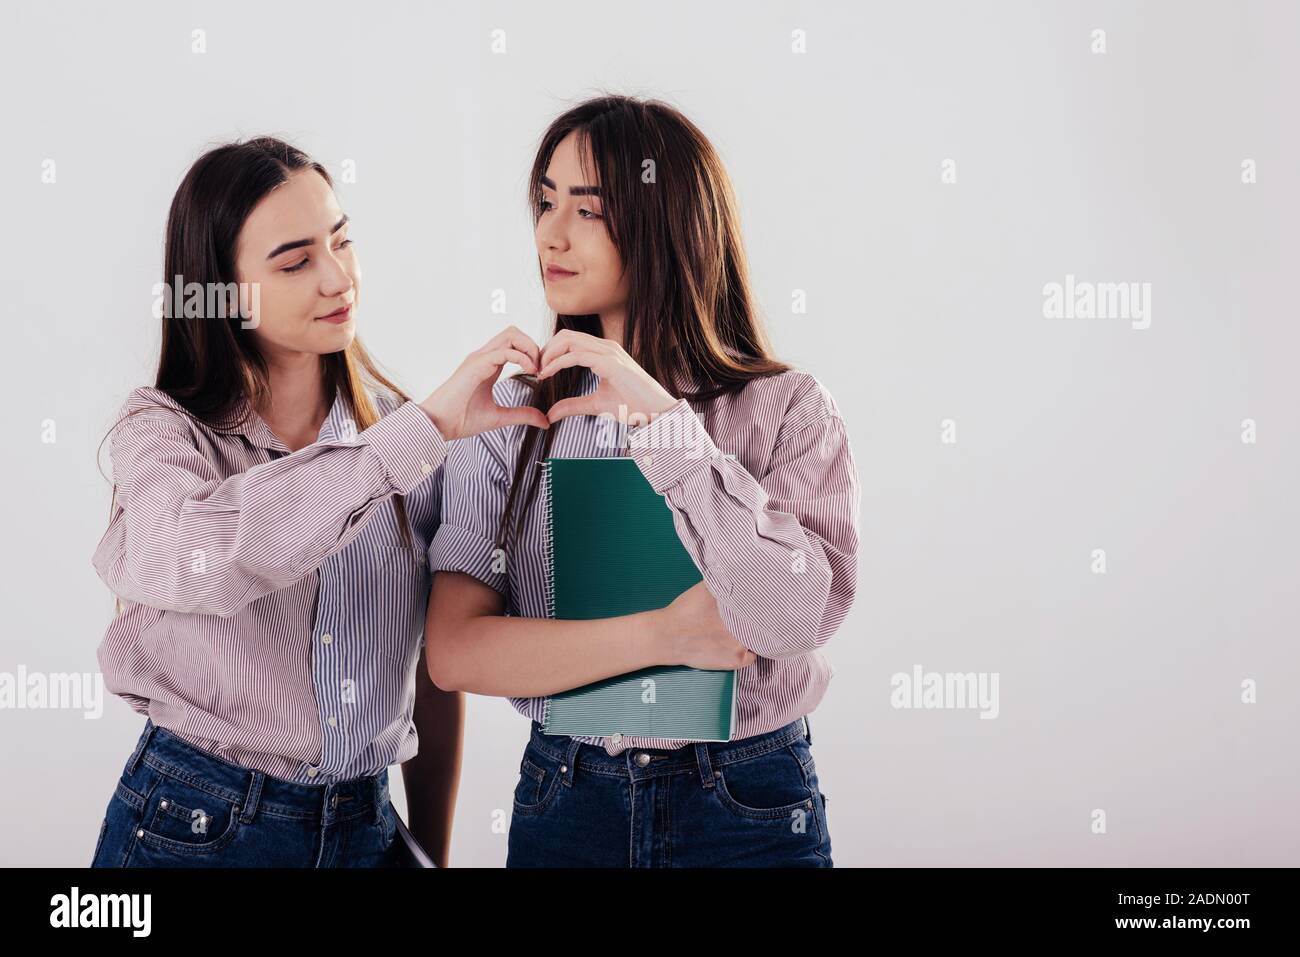 Showing gesture of love. Two sisters twins standing and posing in the studio with white background Stock Photo